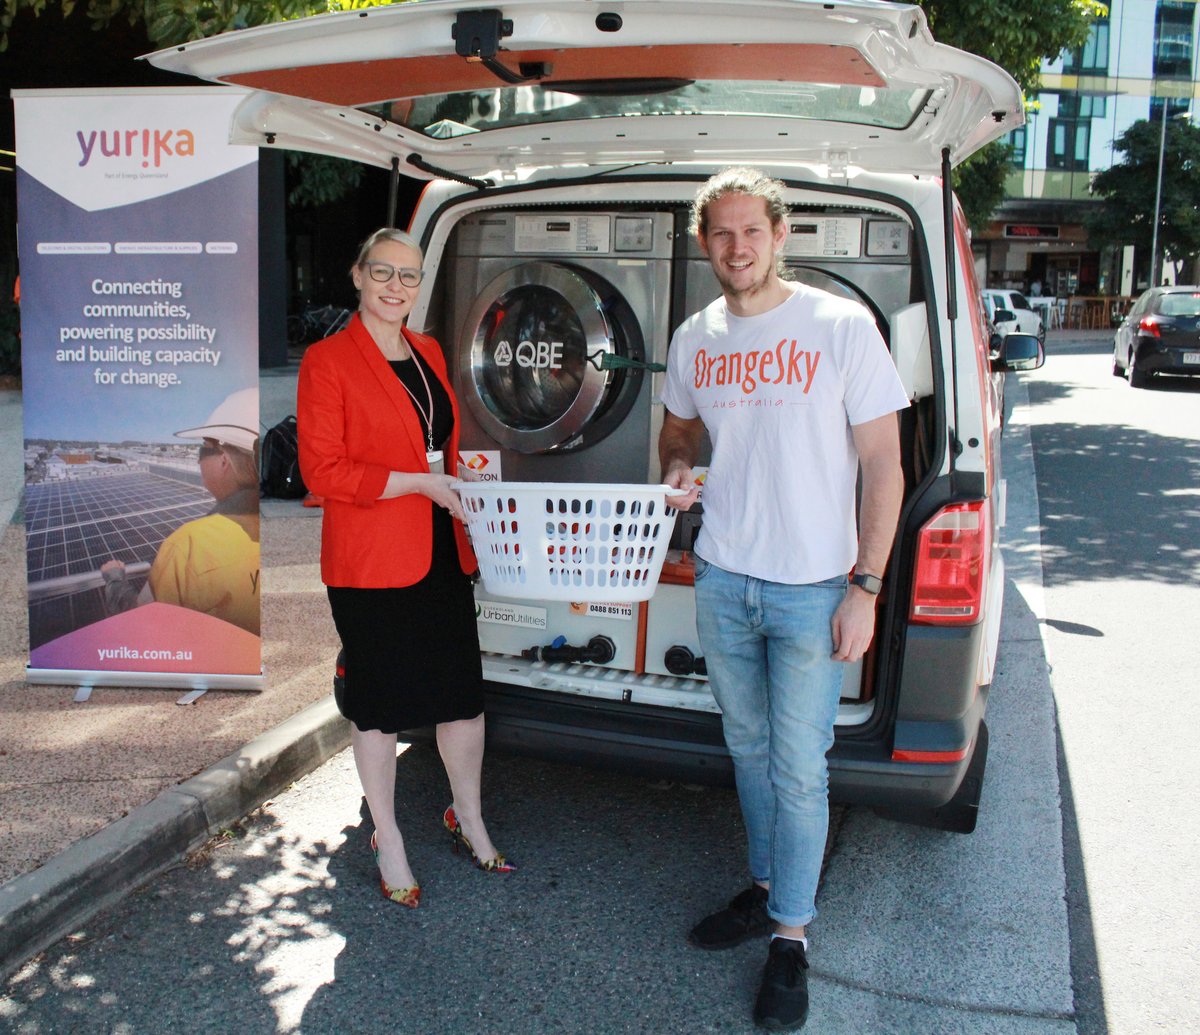 Thanks to @yurika_au and their sponsorship of our van 'Yarramin', our friends in Palm Island will continue to have access to clean laundry, conversation and community connection. Yurika is now entering their second year of partnership with us and we couldn't be more excited!